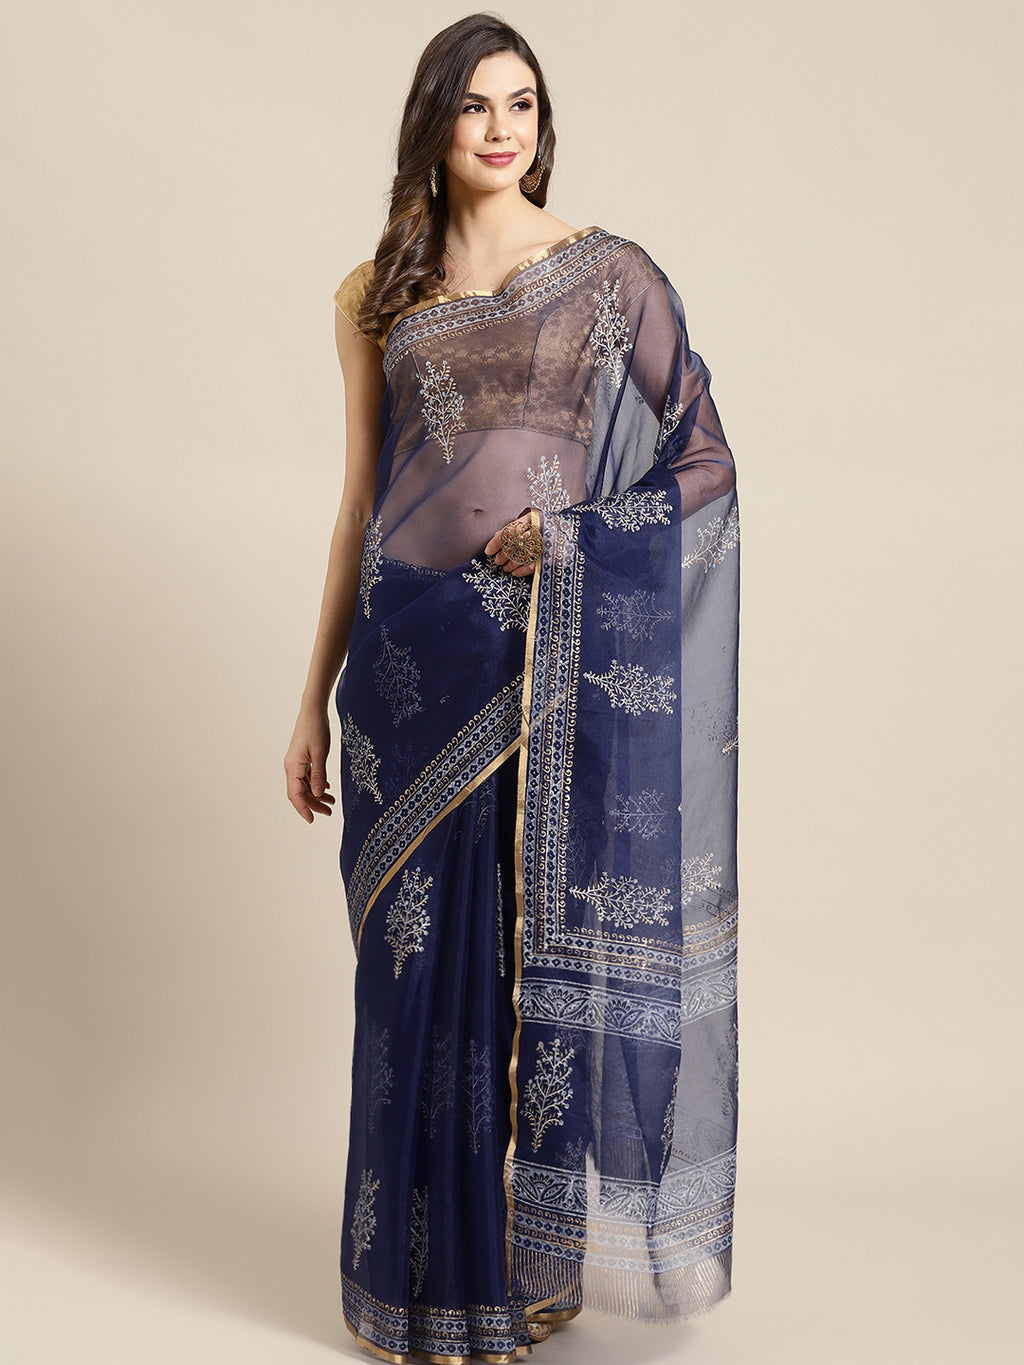 Blue and , Kalakari India Organza Hand Block Print Saree with blouse BHKPSA0146-Saree-Kalakari India-BHKPSA0146-Geographical Indication, Hand Crafted, Hand Painted, Heritage Prints, Natural Dyes, Organza, Red, Sarees, Sustainable Fabrics, Woven, Yellow-[Linen,Ethnic,wear,Fashionista,Handloom,Handicraft,Indigo,blockprint,block,print,Cotton,Chanderi,Blue, latest,classy,party,bollywood,trendy,summer,style,traditional,formal,elegant,unique,style,hand,block,print, dabu,booti,gift,present,glamorous,af